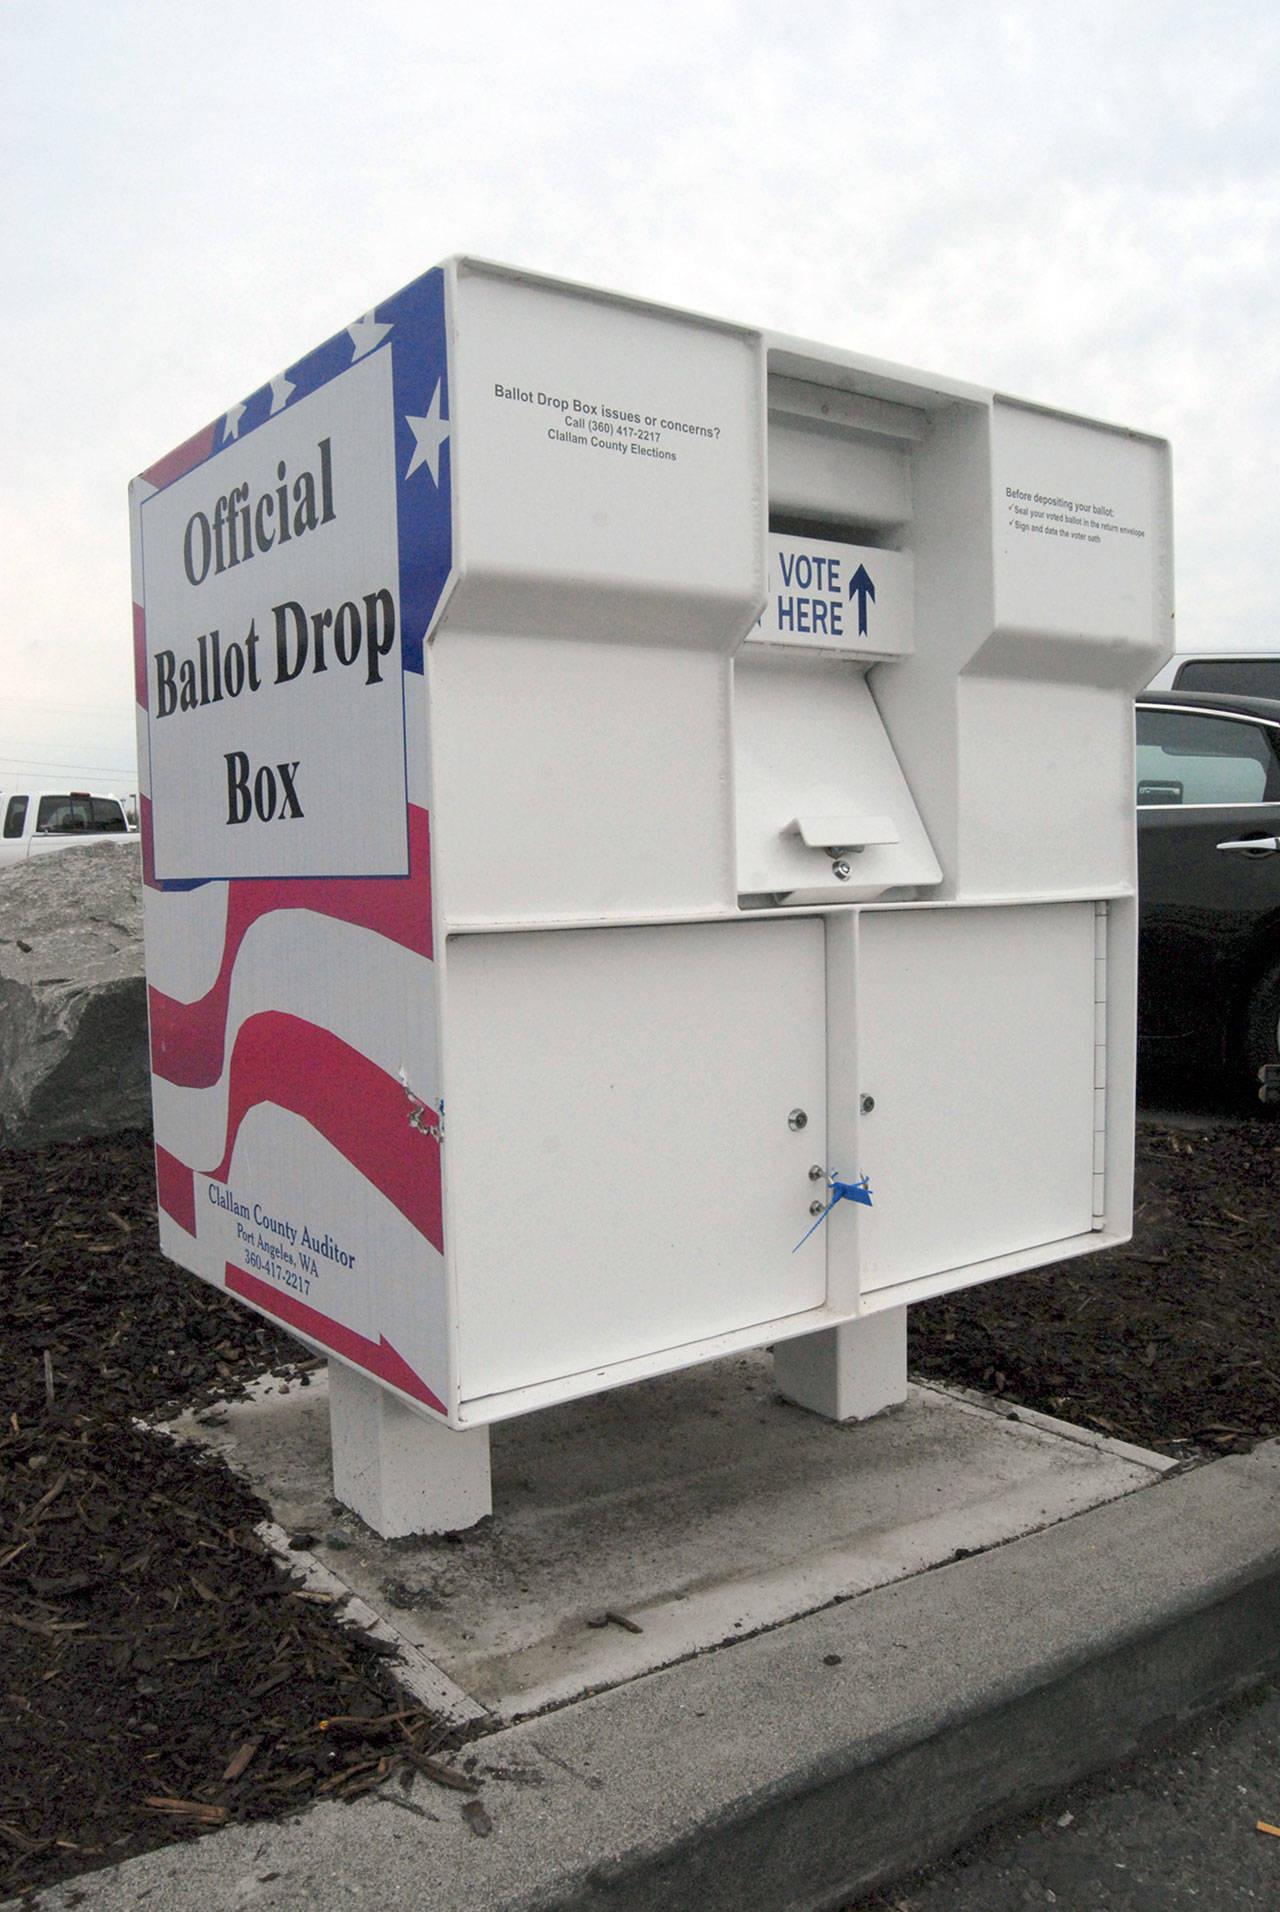 Ballot drop boxes similar to the one shown here near the JCPenny store in Sequim are now in place in Sekiu, Neah Bay and Clallam Bay, with another scheduled to open this week near Carlsborg. (Keith Thorpe/Peninsula Daily News)